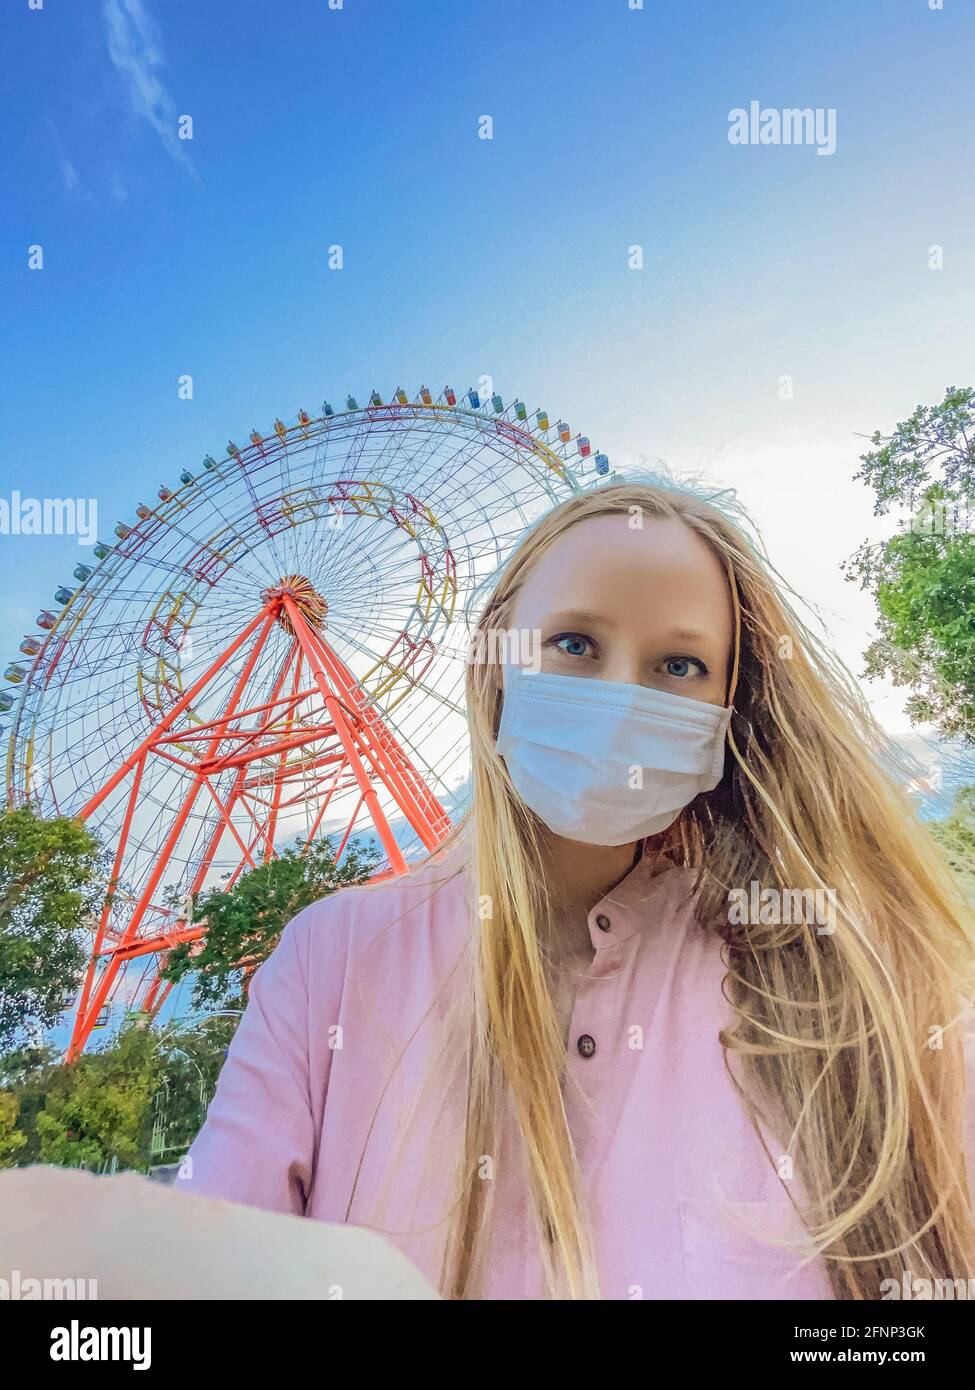 A woman in a pink dress takes a selfie on the background of a ferris wheel Stock Photo